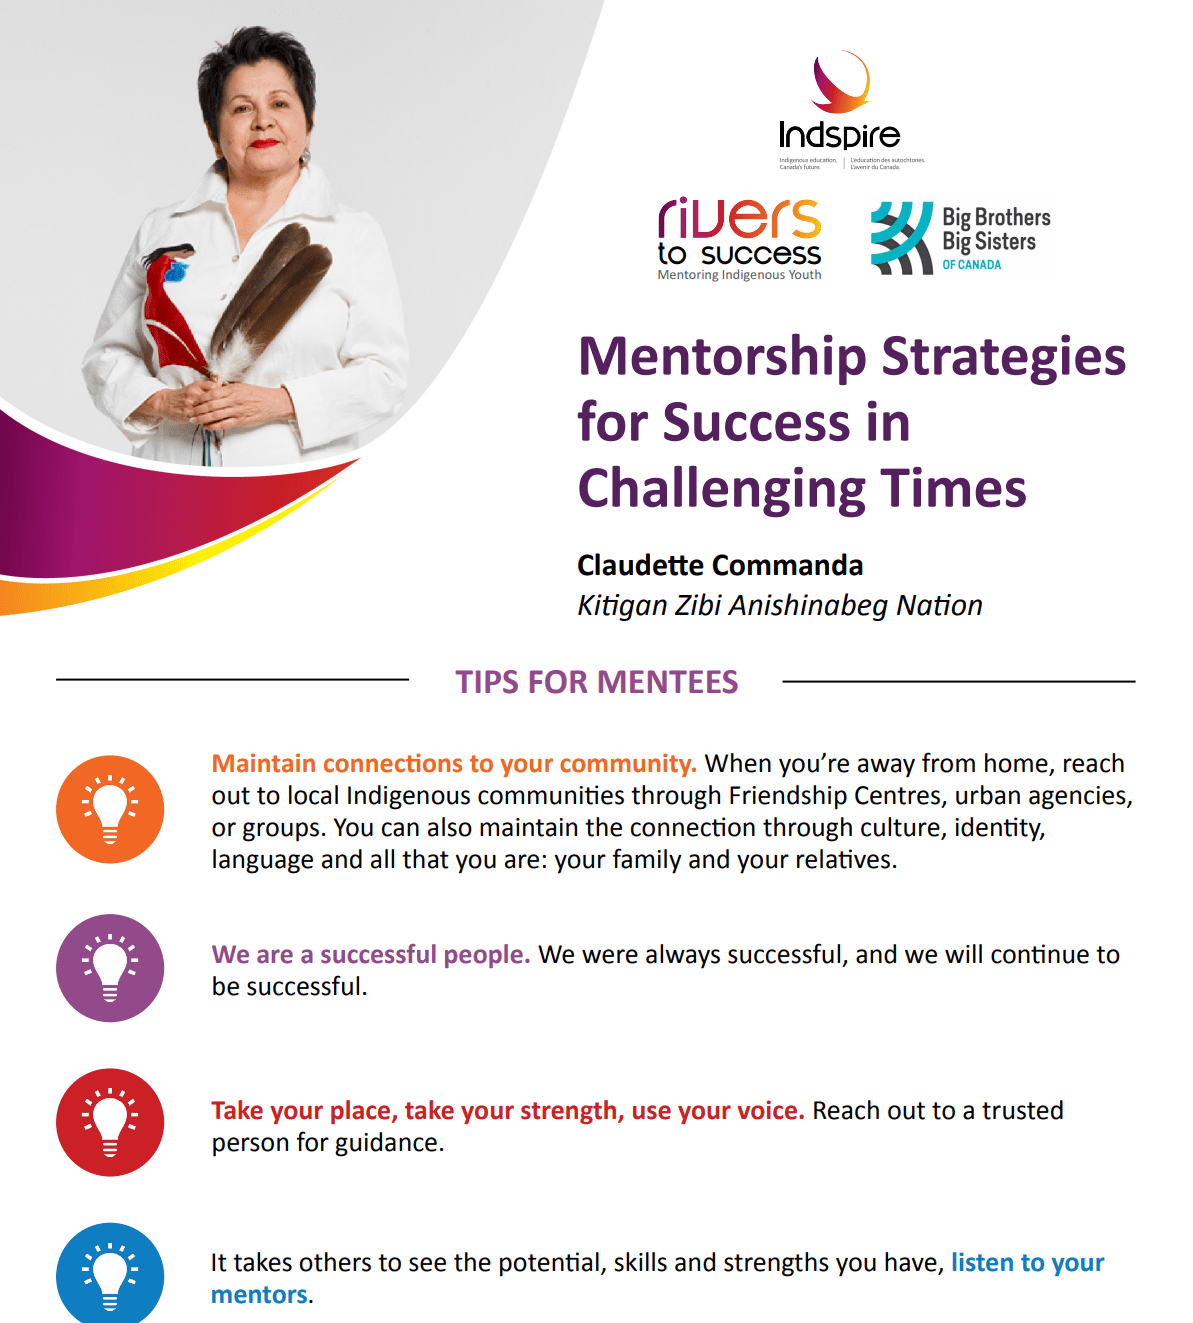 Mentorship strategies for success in challenging times